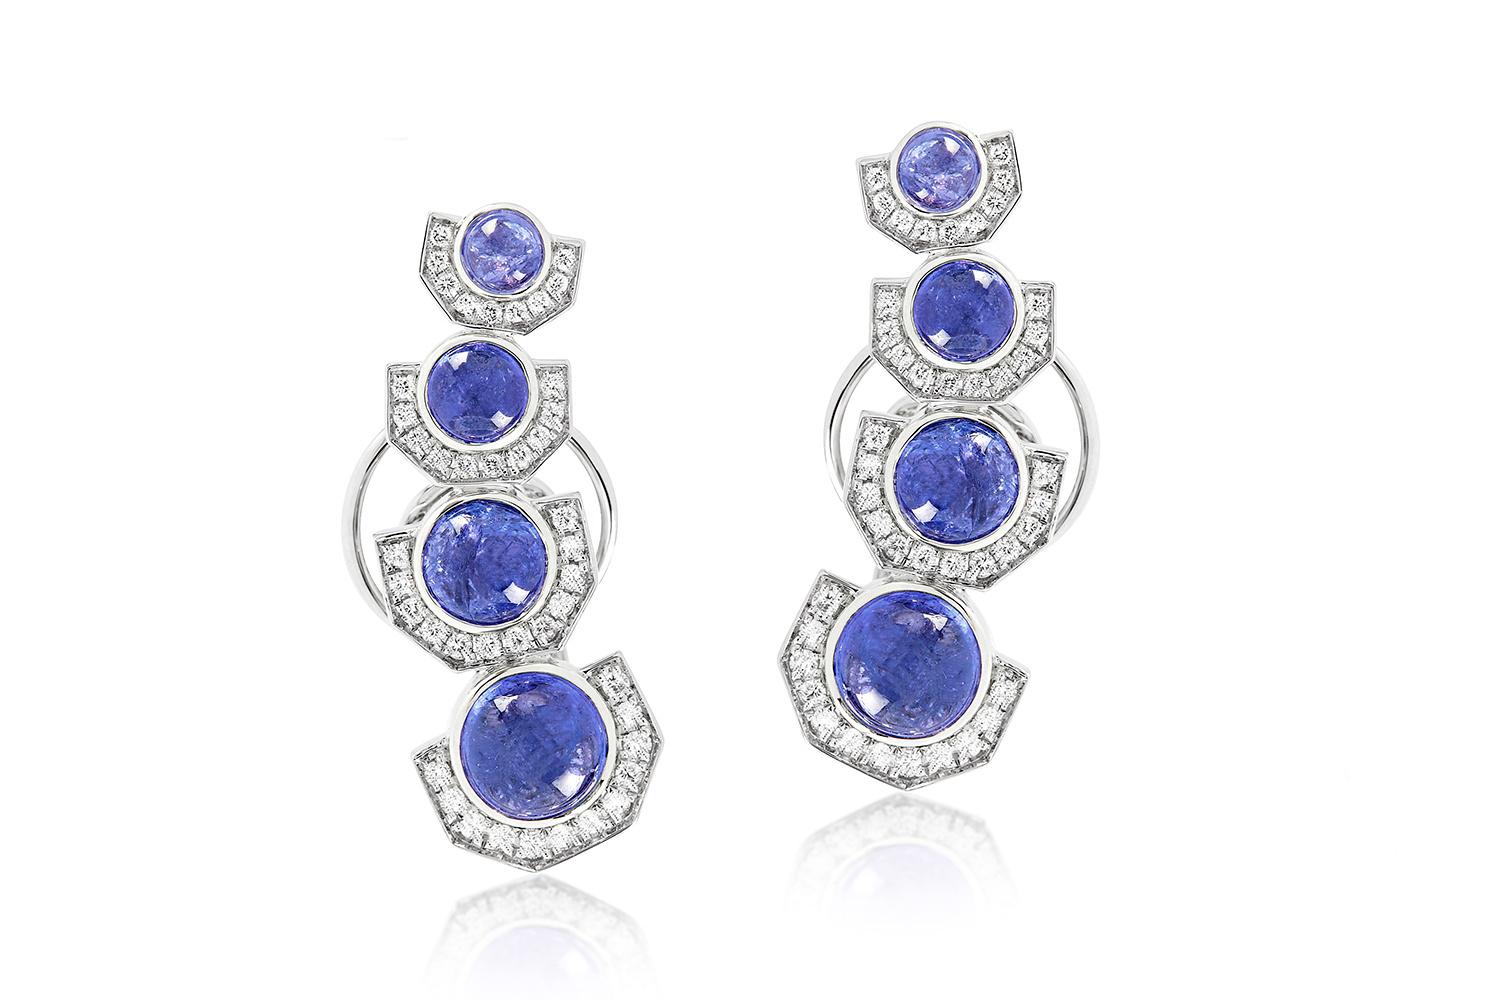 Set in 18K White Gold


Total diamond weight: 0.47 ct
Color: F-G
Clarity: VVS1

Total tanzanite weight: 5.89 ct

16mm drop